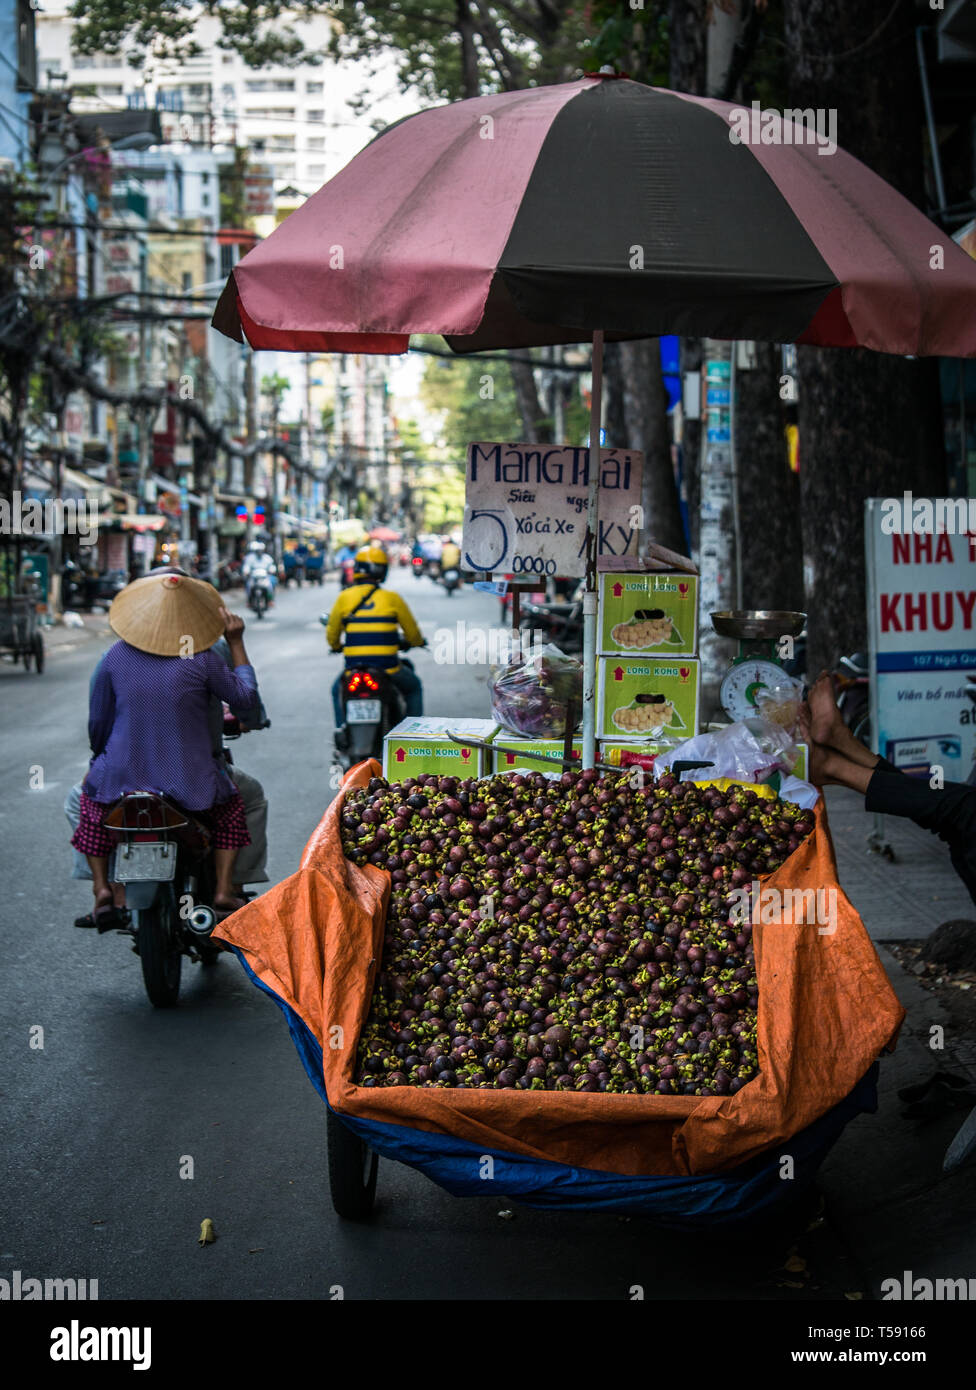 Road stand with cart full of mangosteen fruits and motorbikes passing by, Ho Chi Minh City, Vietnam, Asia Stock Photo